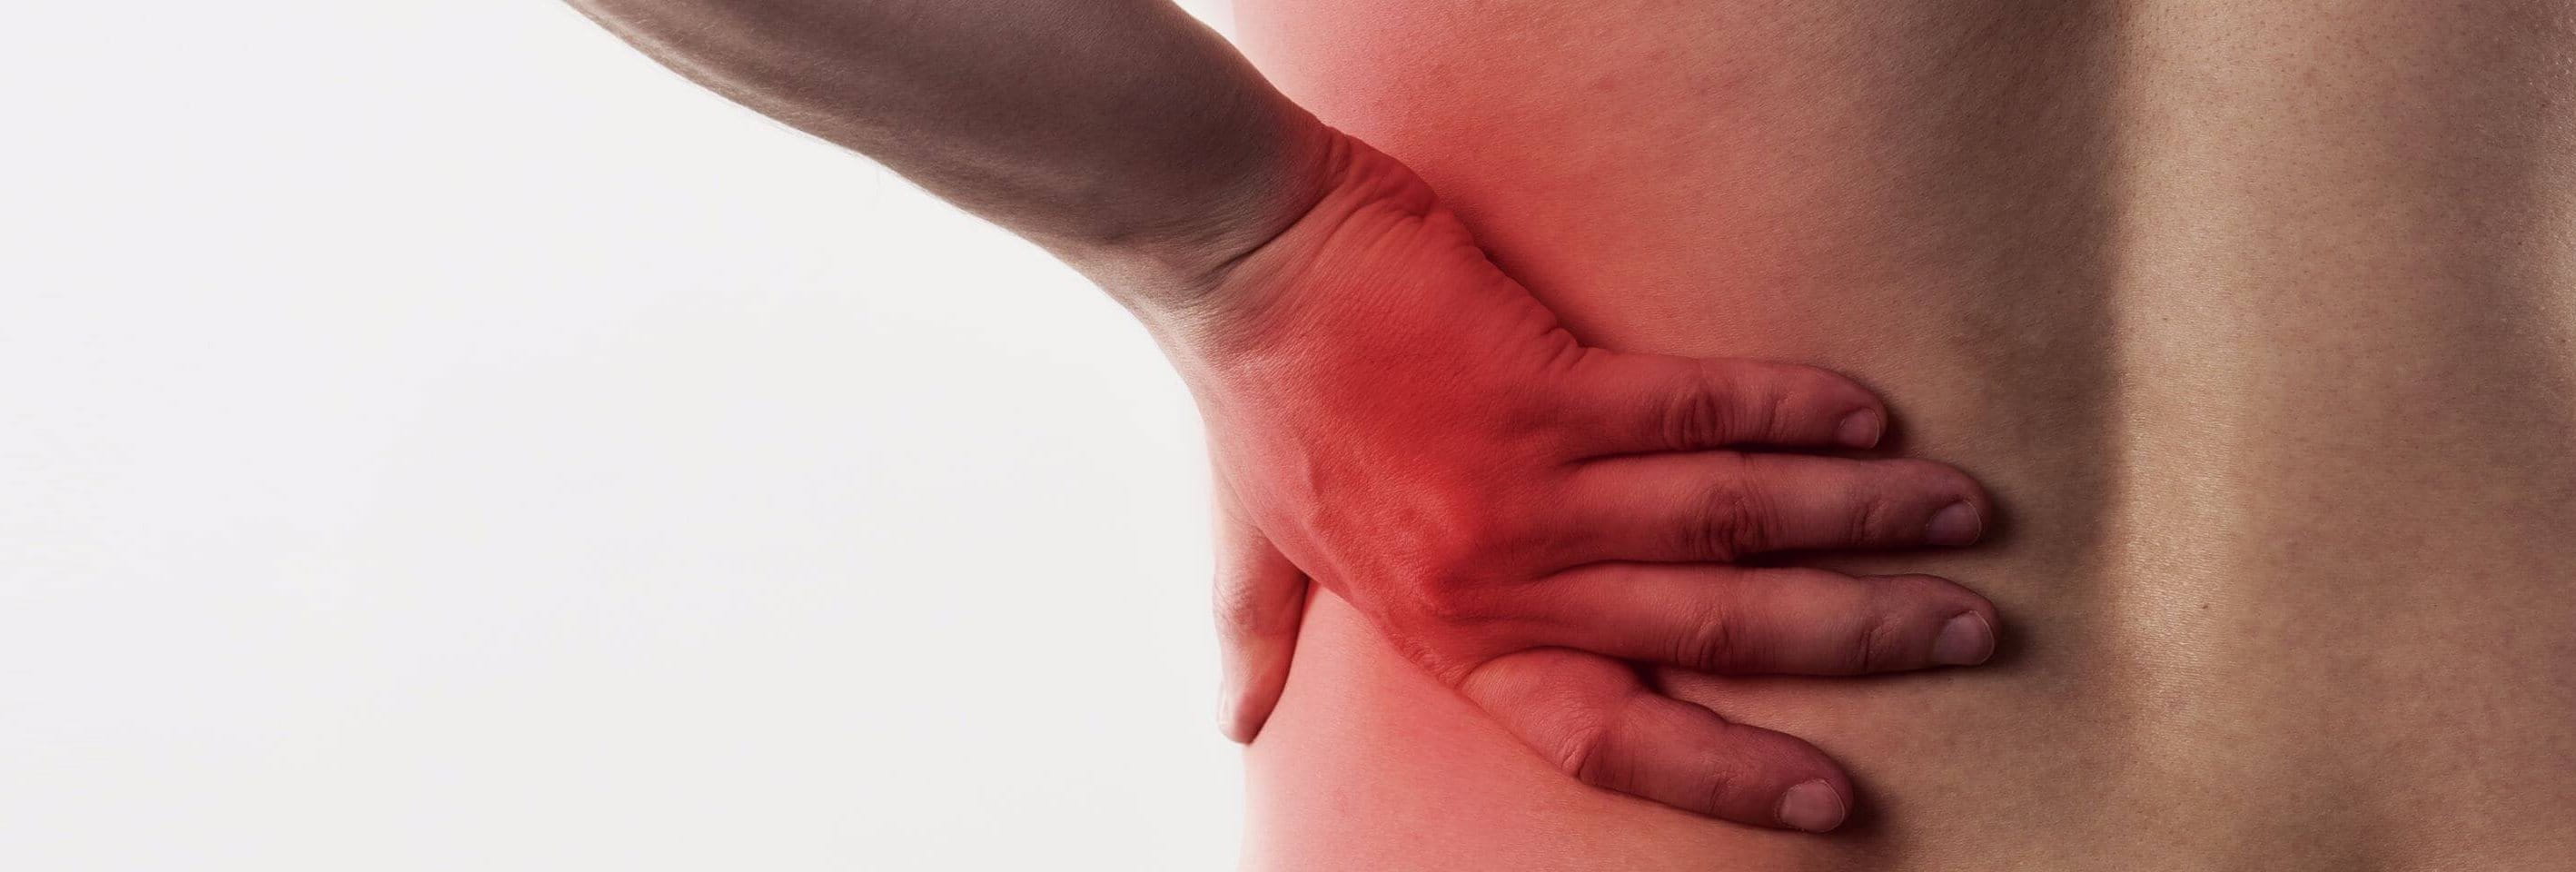 hip pain and injury treatment